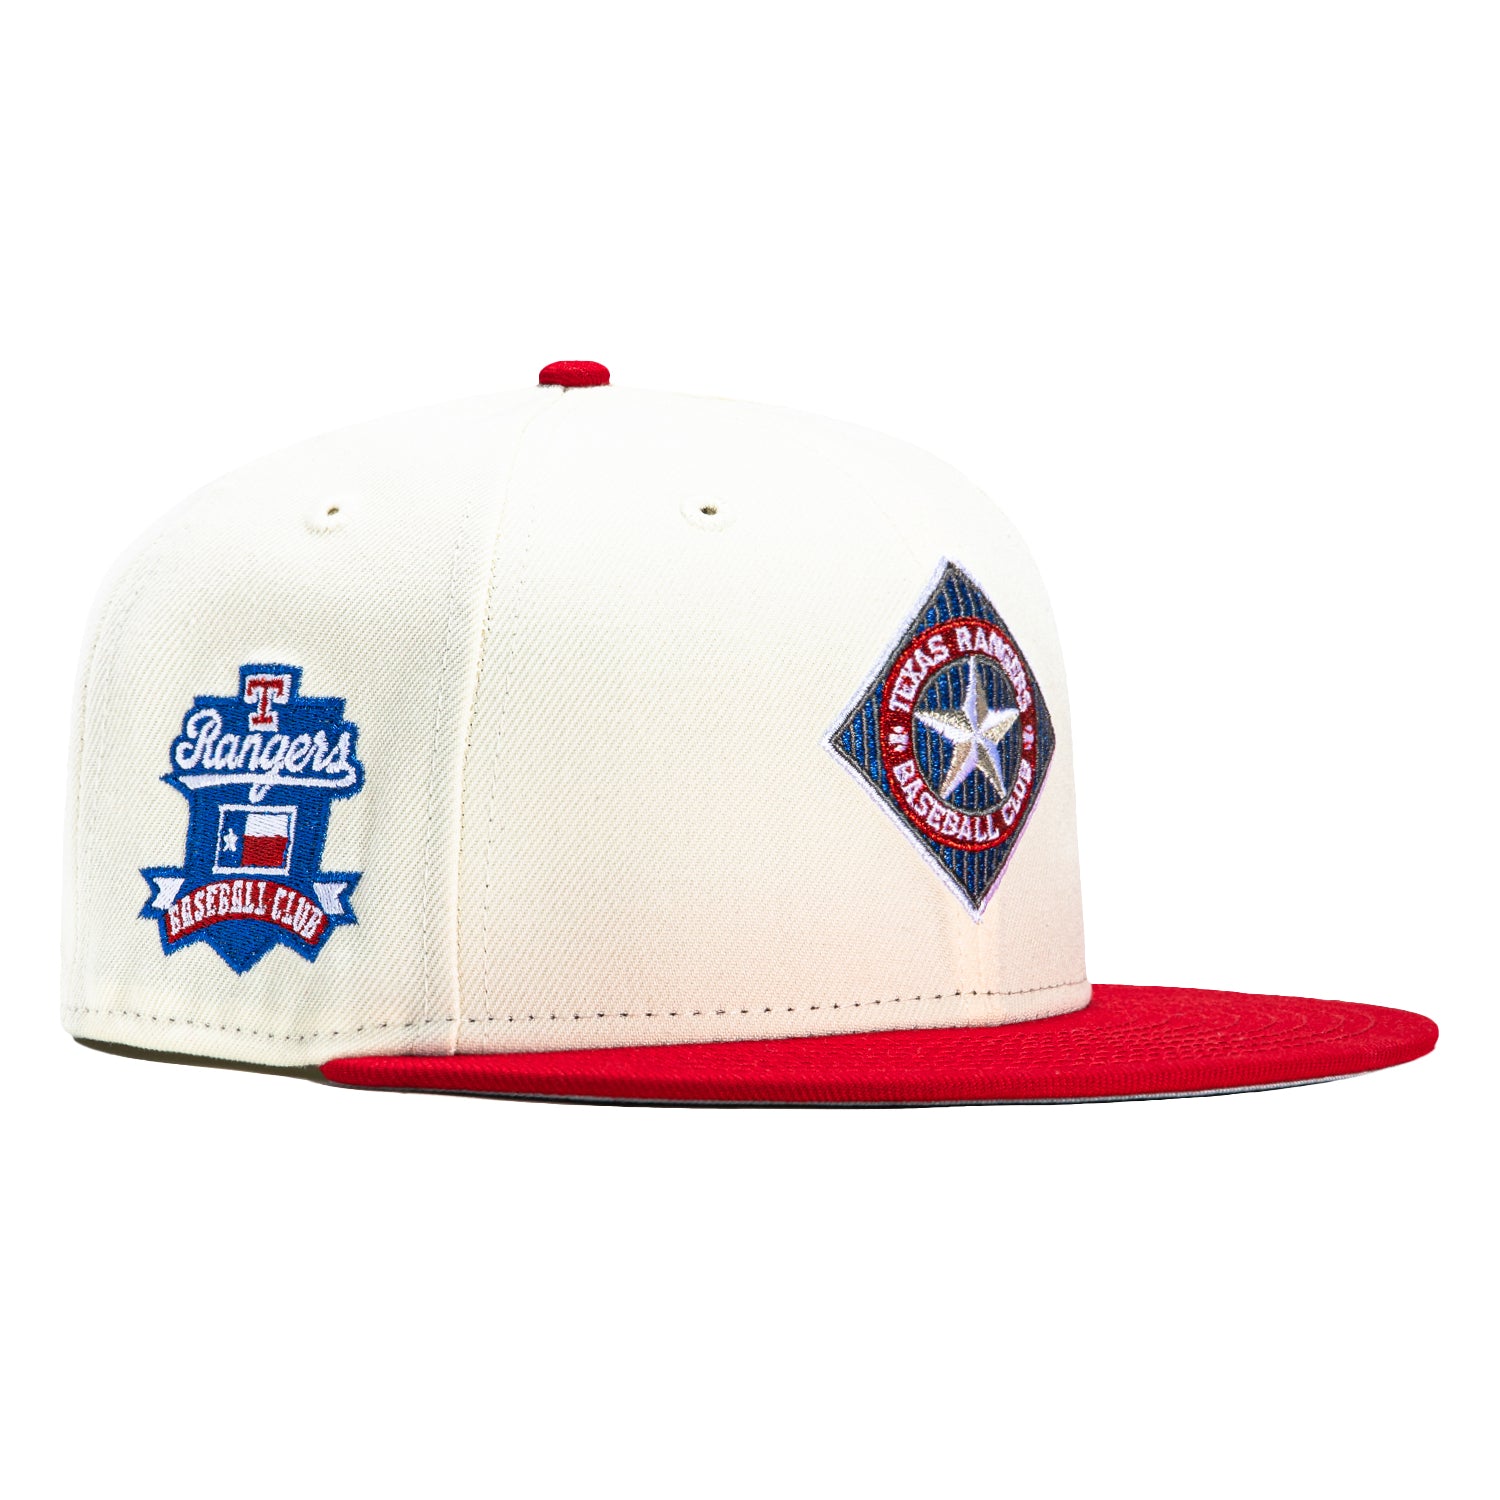 NEW ERA COUNTRY CLUB TEXAS RANGERS FITTED (BLACK PINSTRIPE/RED